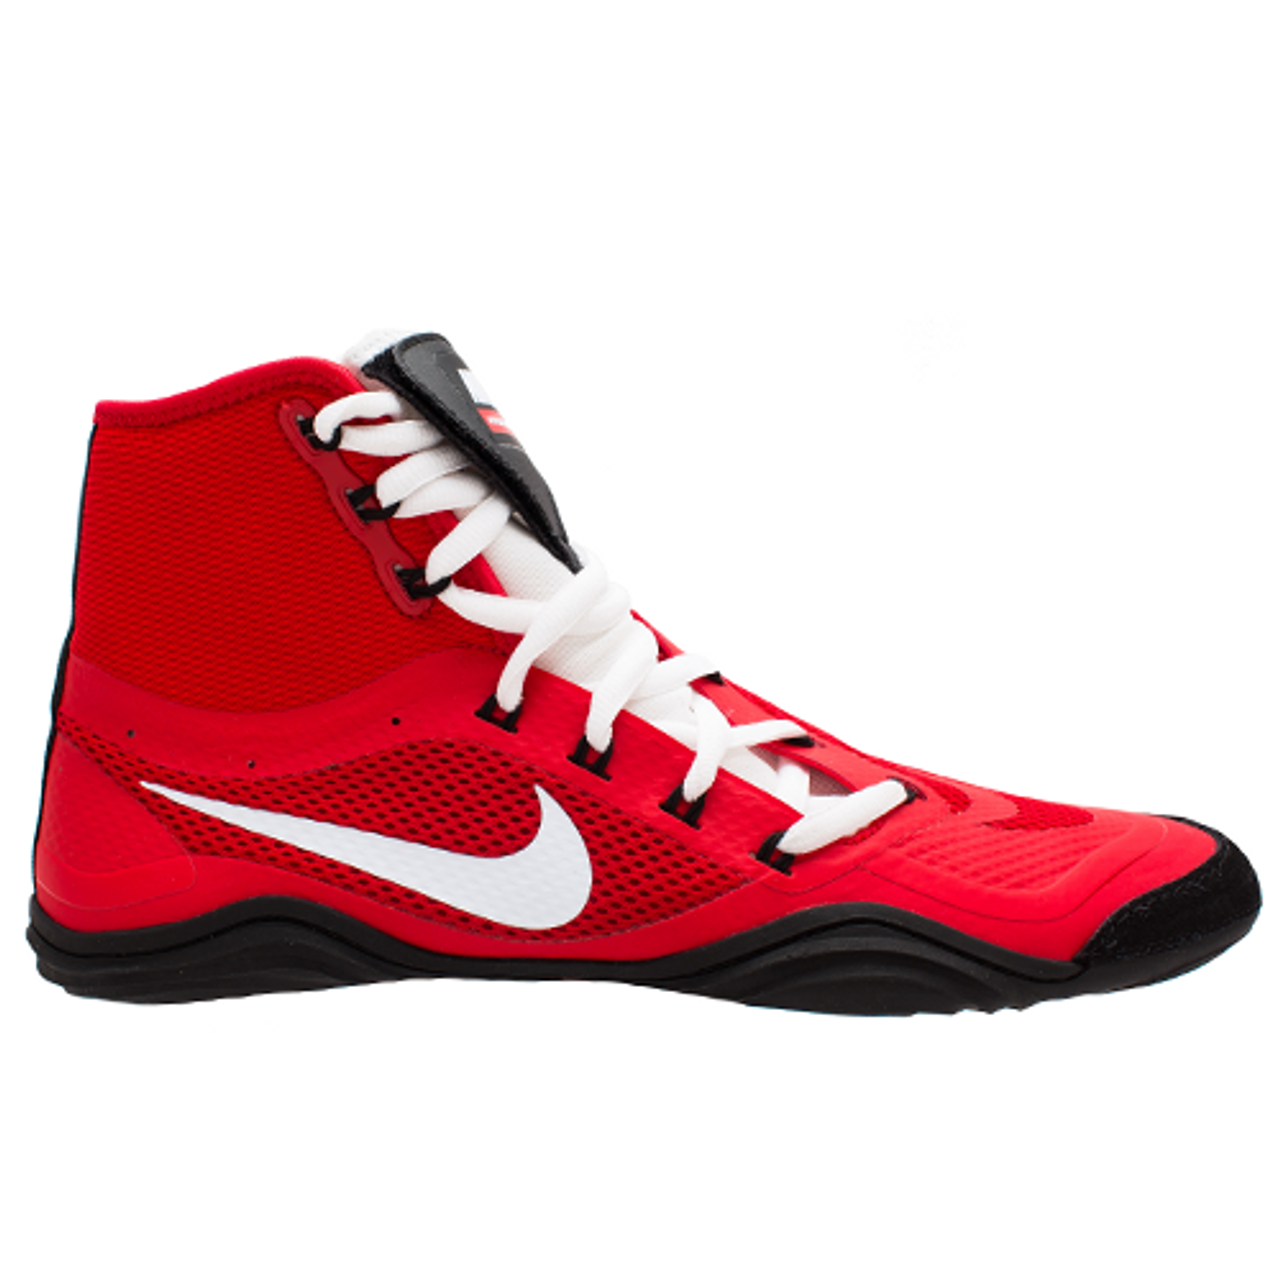 Nike Hypersweep Limited Edition - Red 